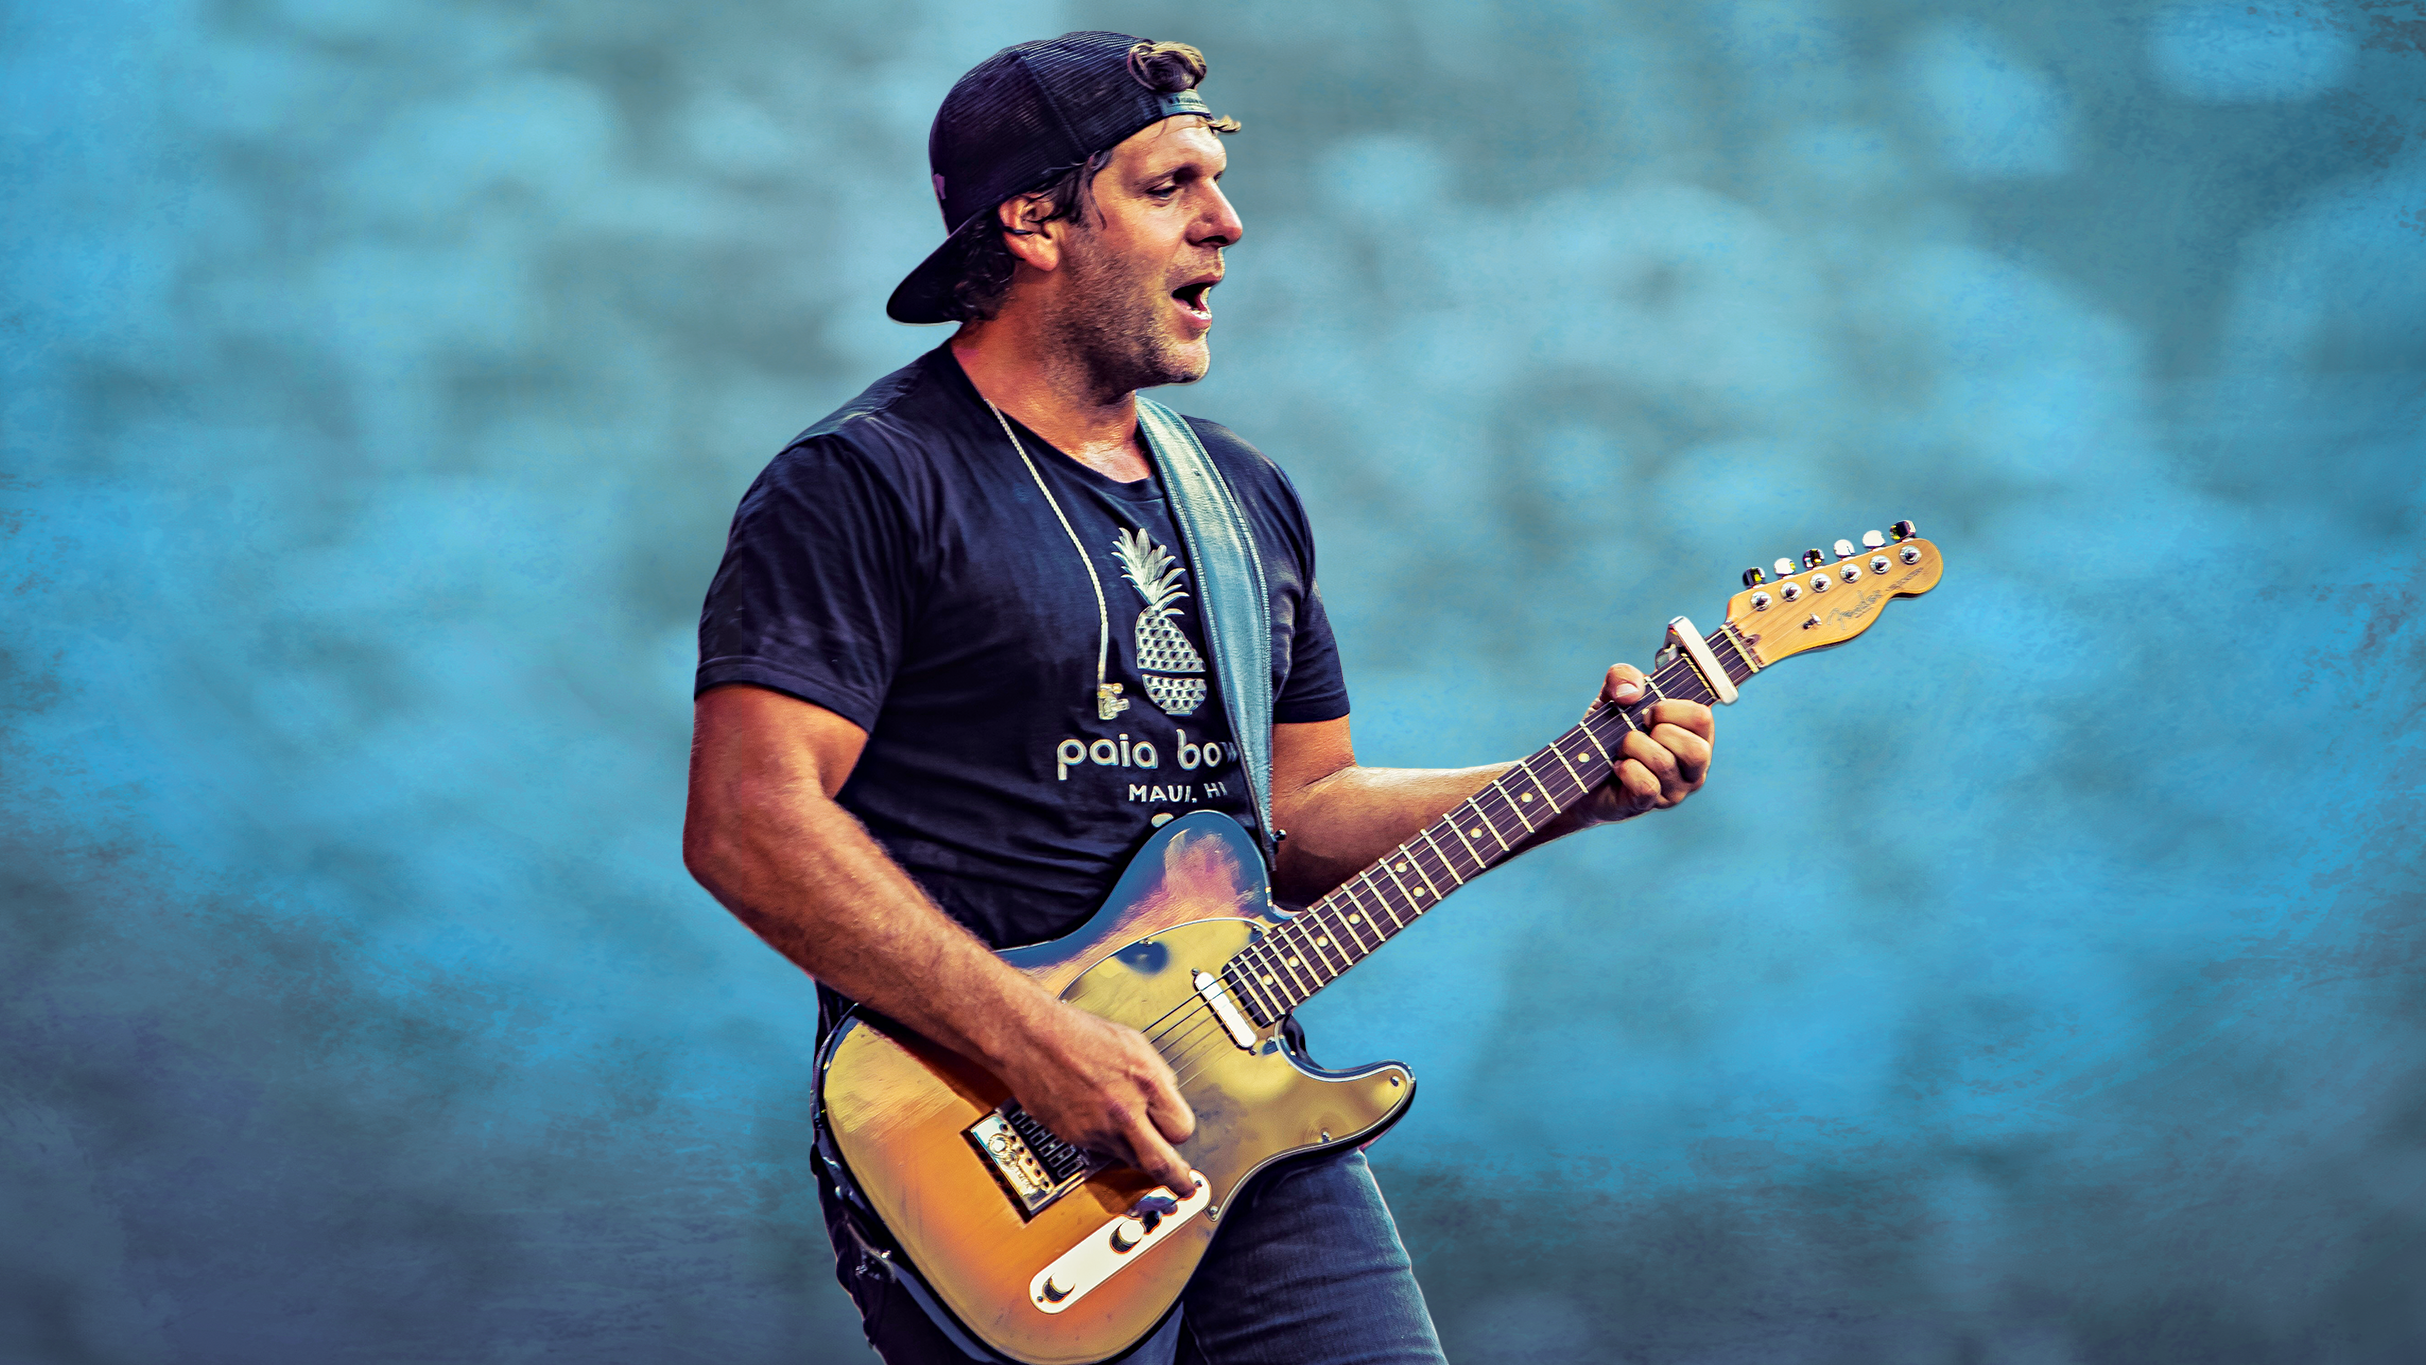 Way Out West Festival Featuring Billy Currington